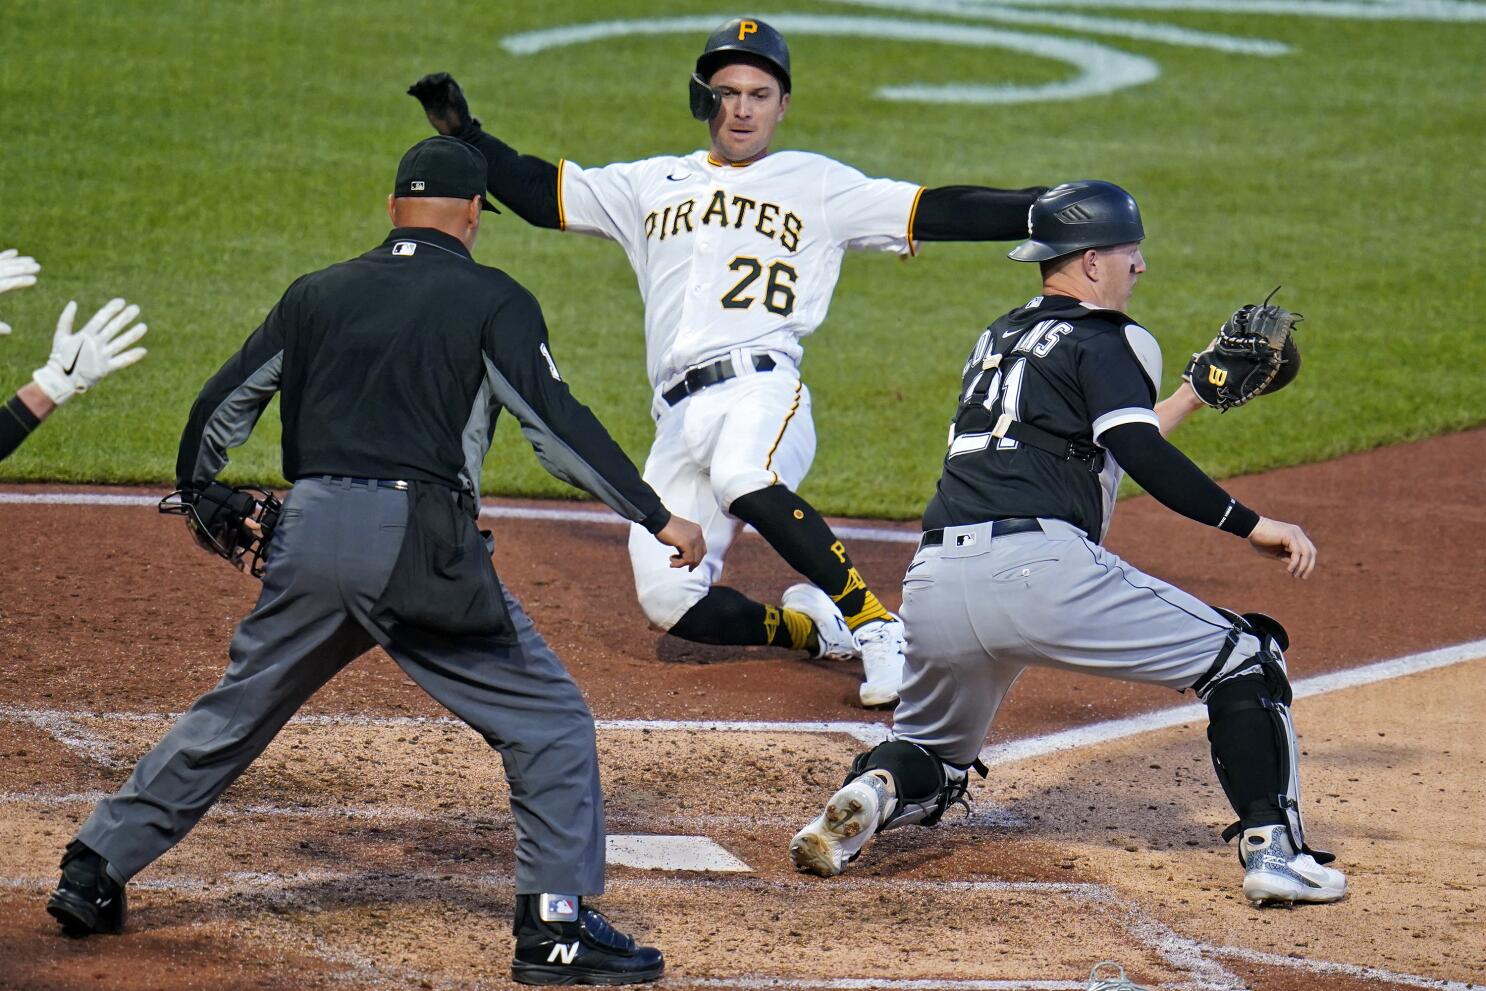 PITTSBURGH PIRATES: Erik Gonzalez and Kevin Newman competing to